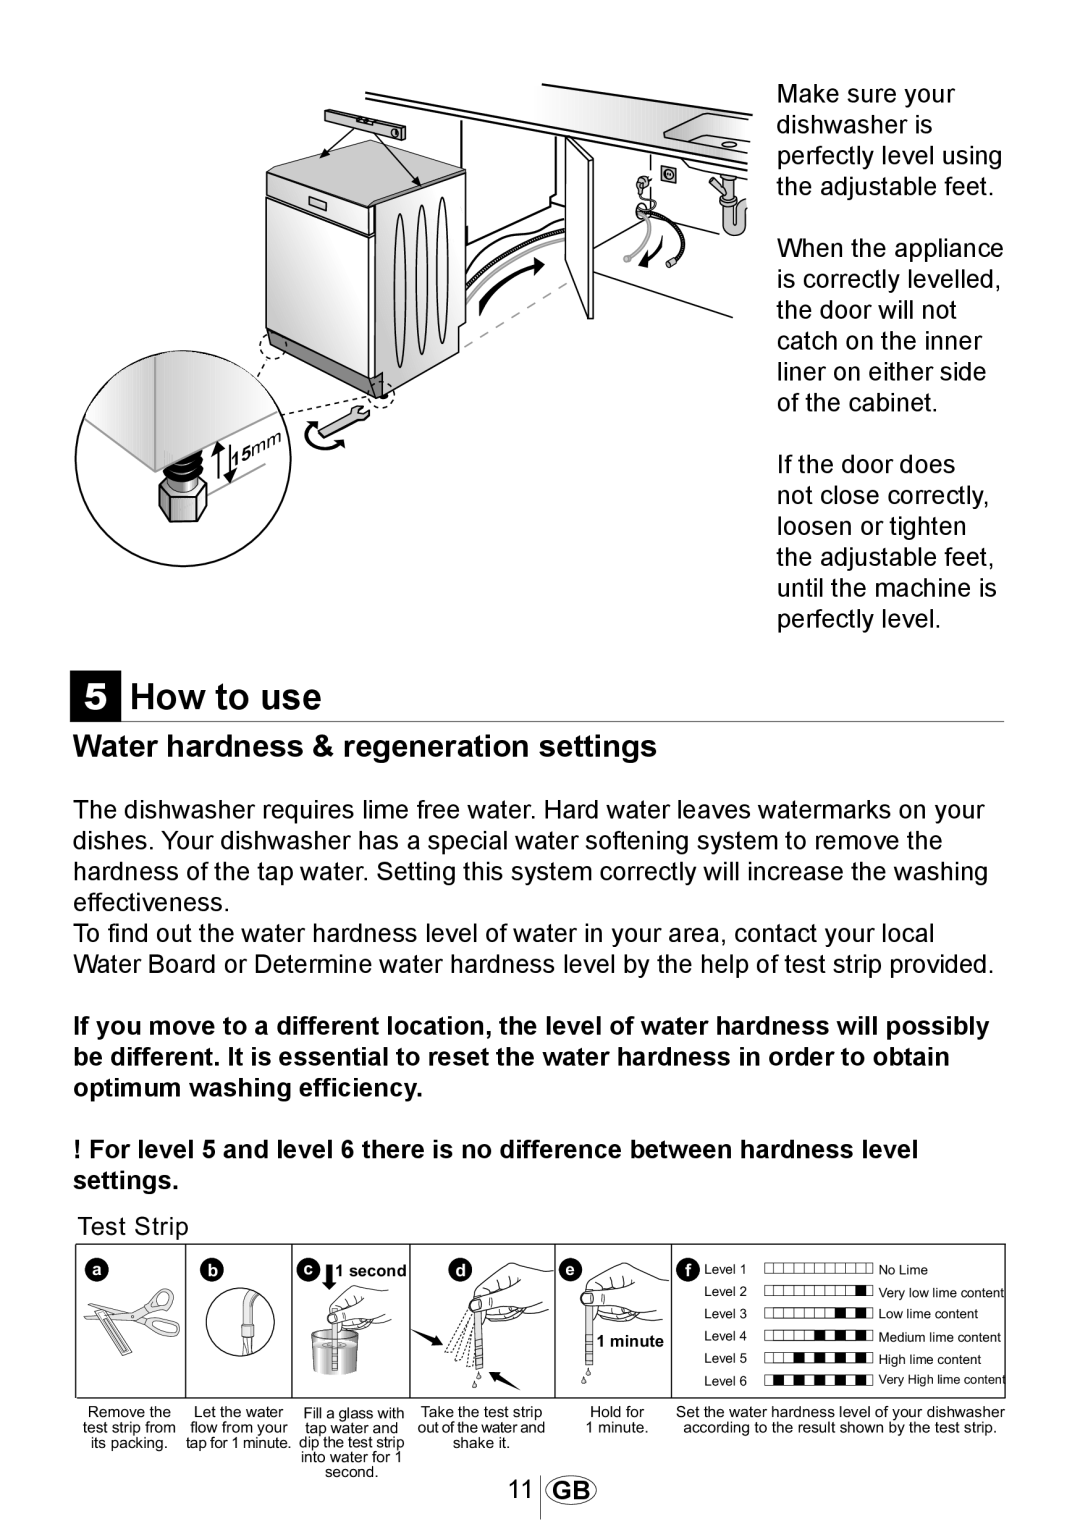 Beko dsfs 1531 w manual How to use, Water hardness & regeneration settings, 11 GB 